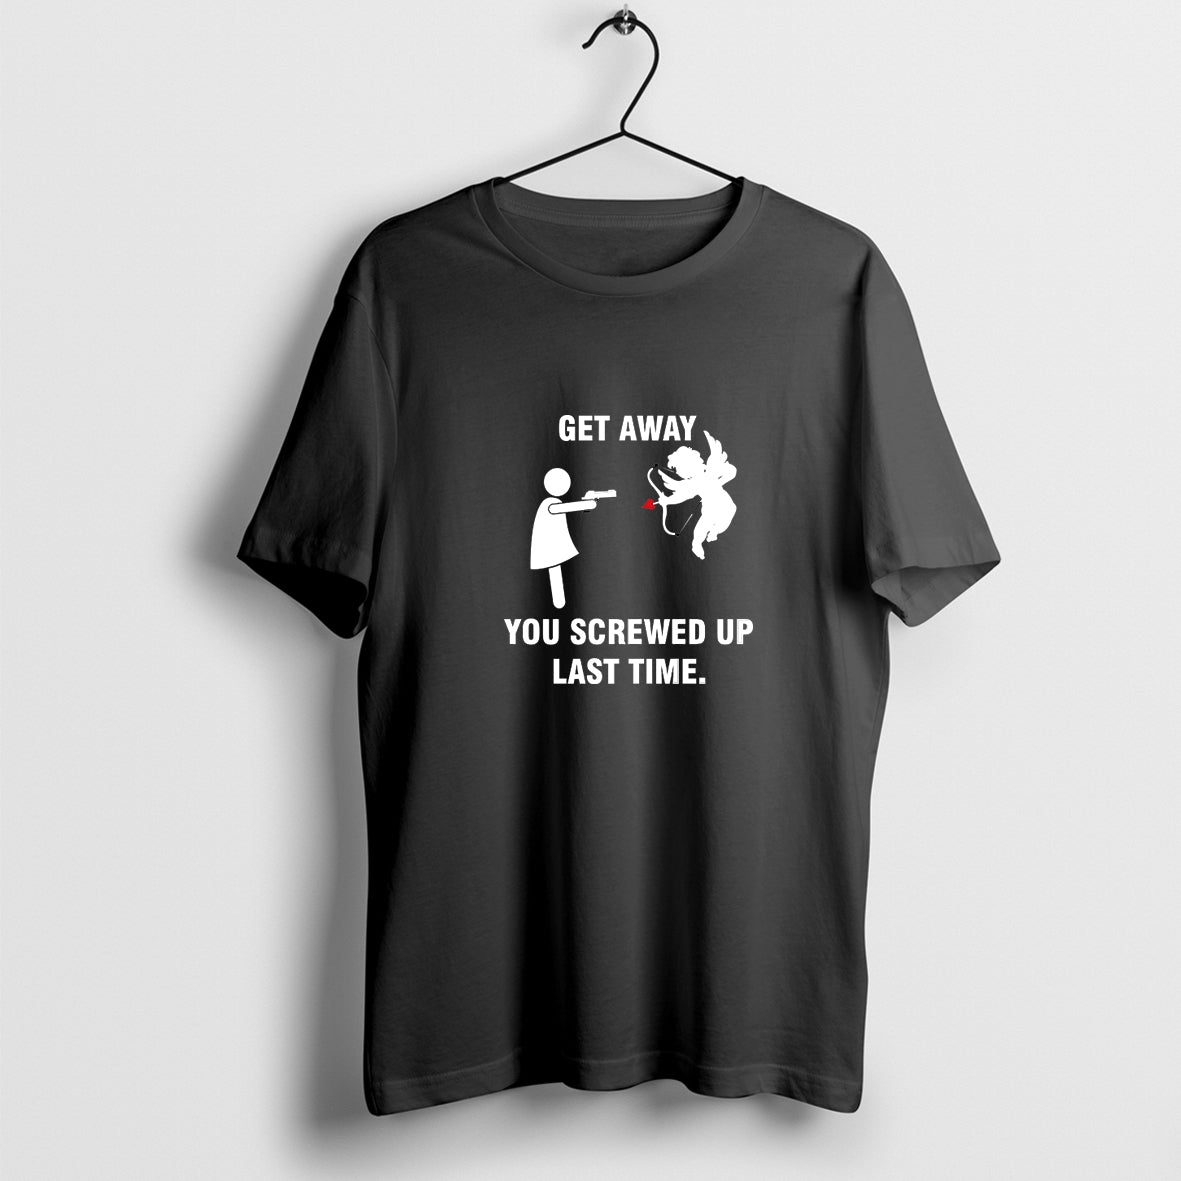 Get Away You Screwed up Last Time T-Shirt, Stay Away Shirt, Anti Valentines Day, Funny Valentine's Day Gift